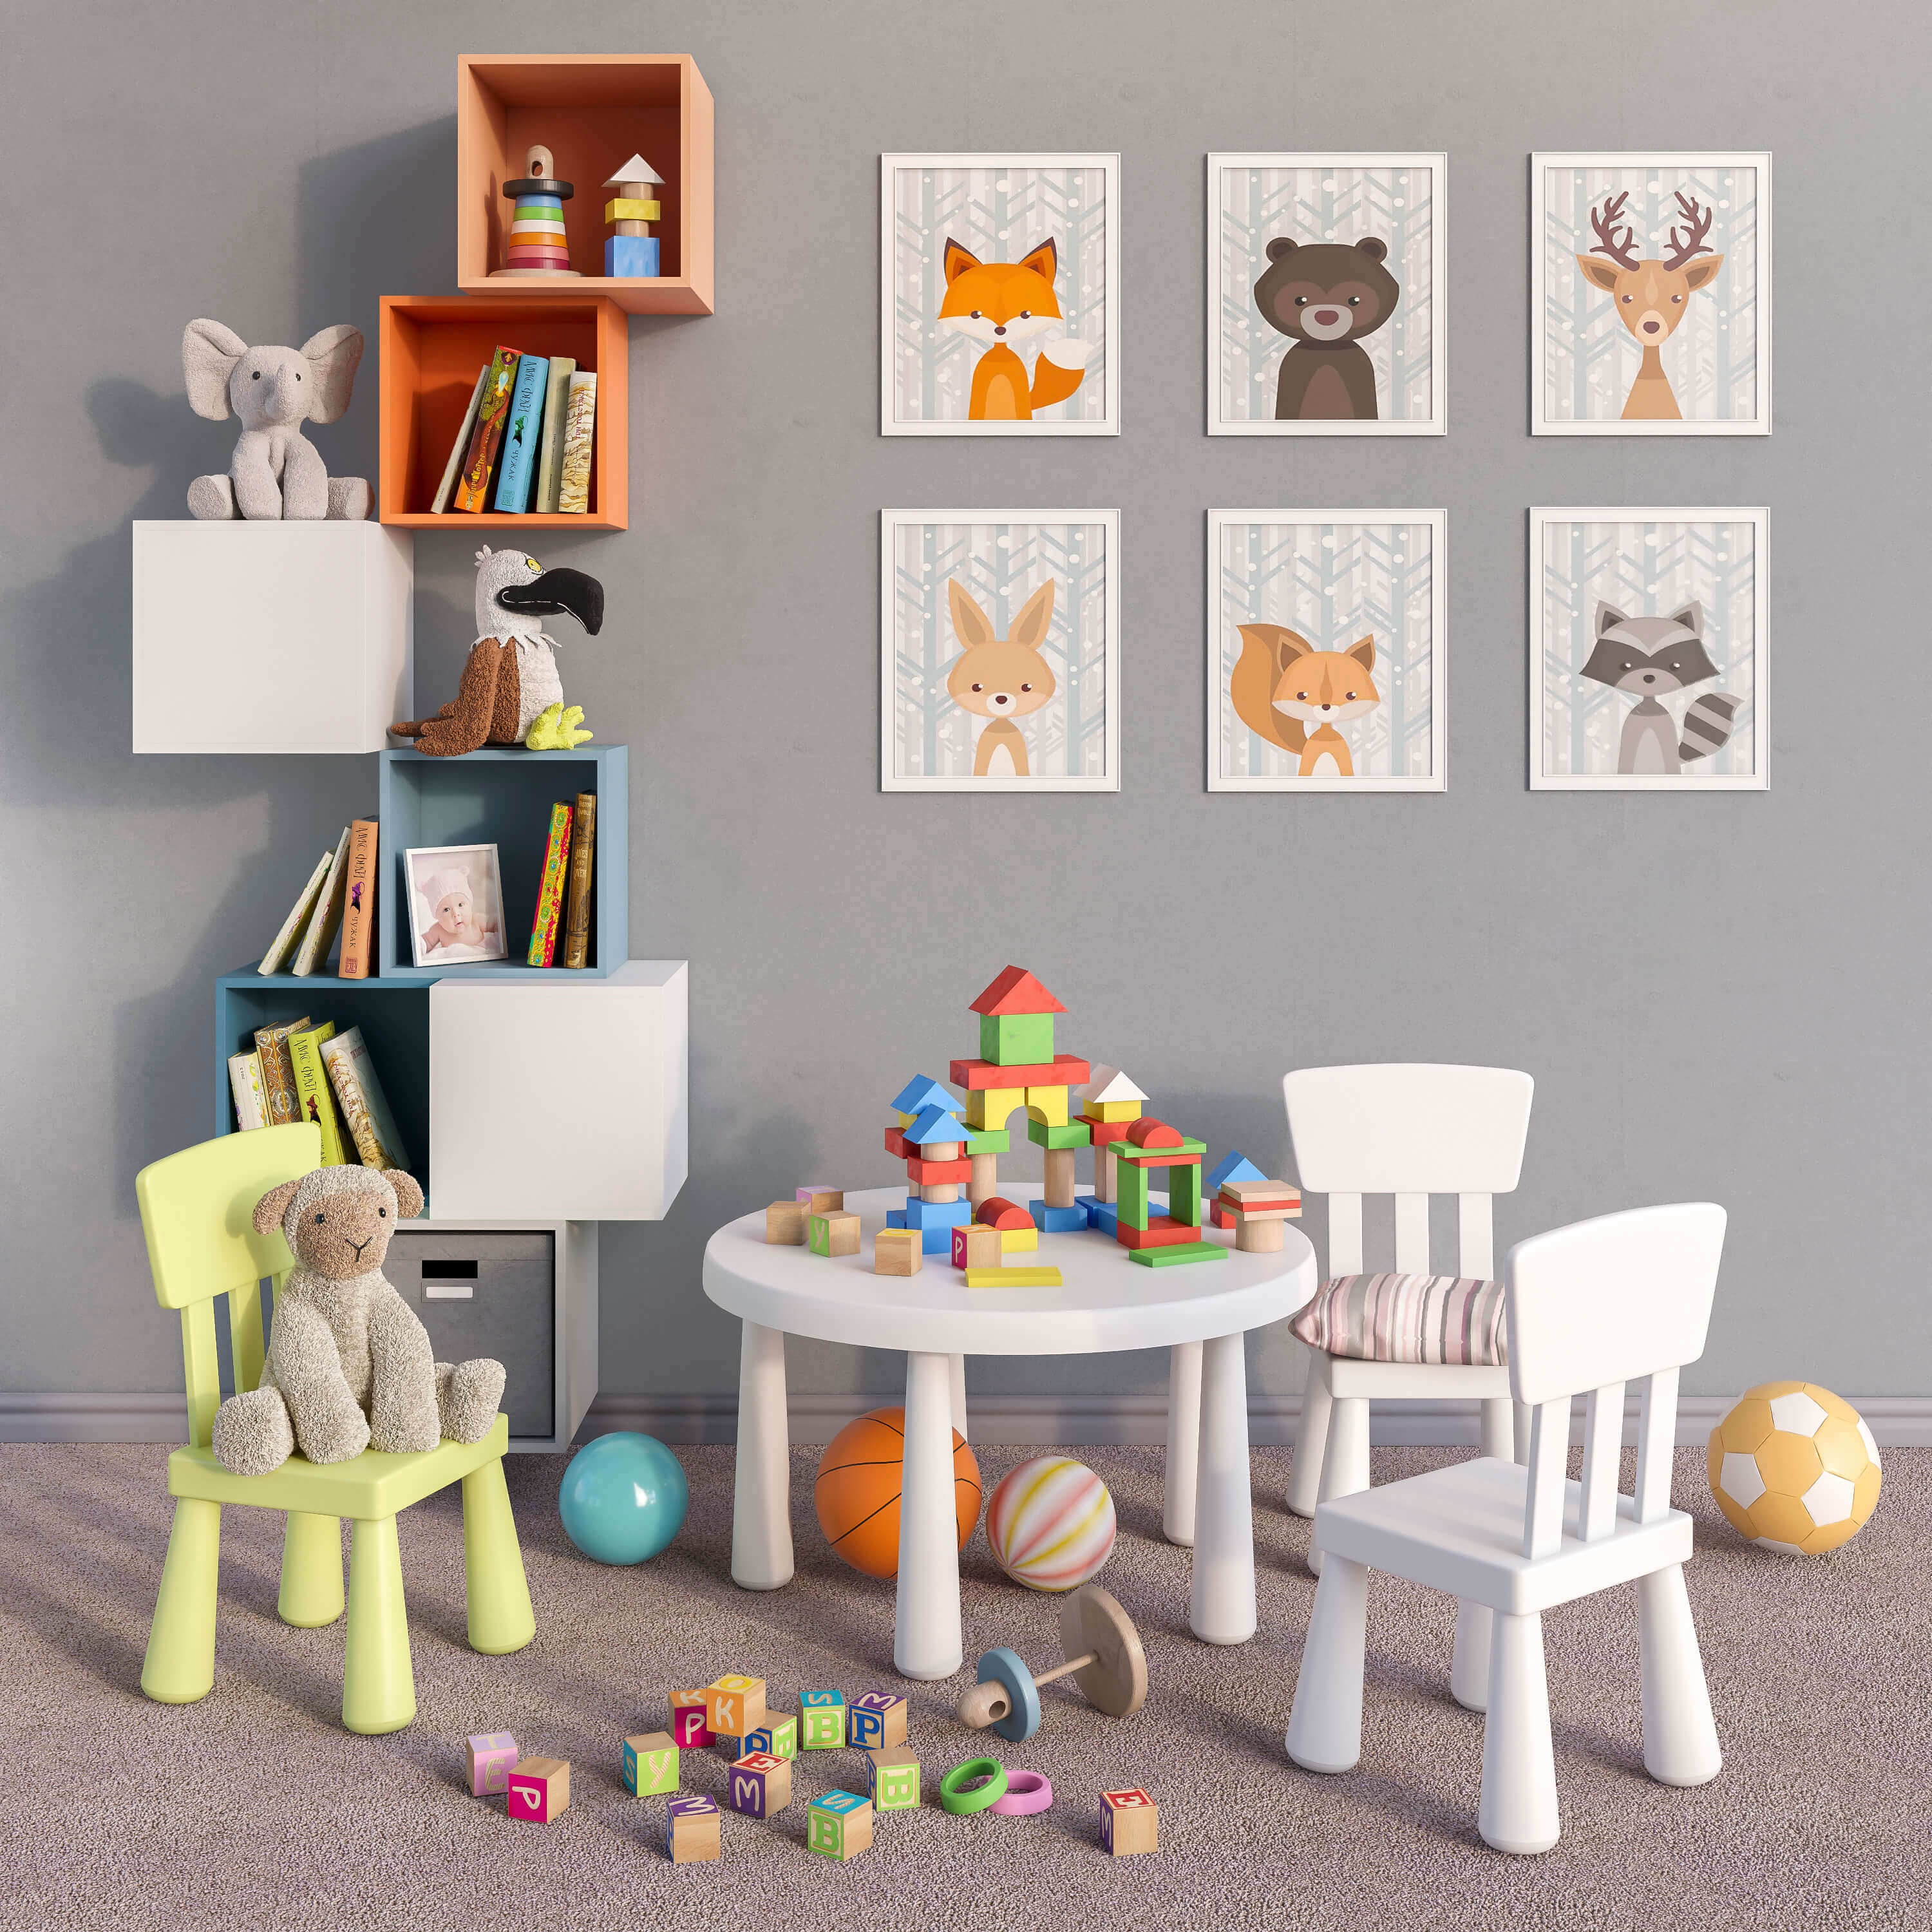 Other decorative objects / Full furniture set / Toys 1